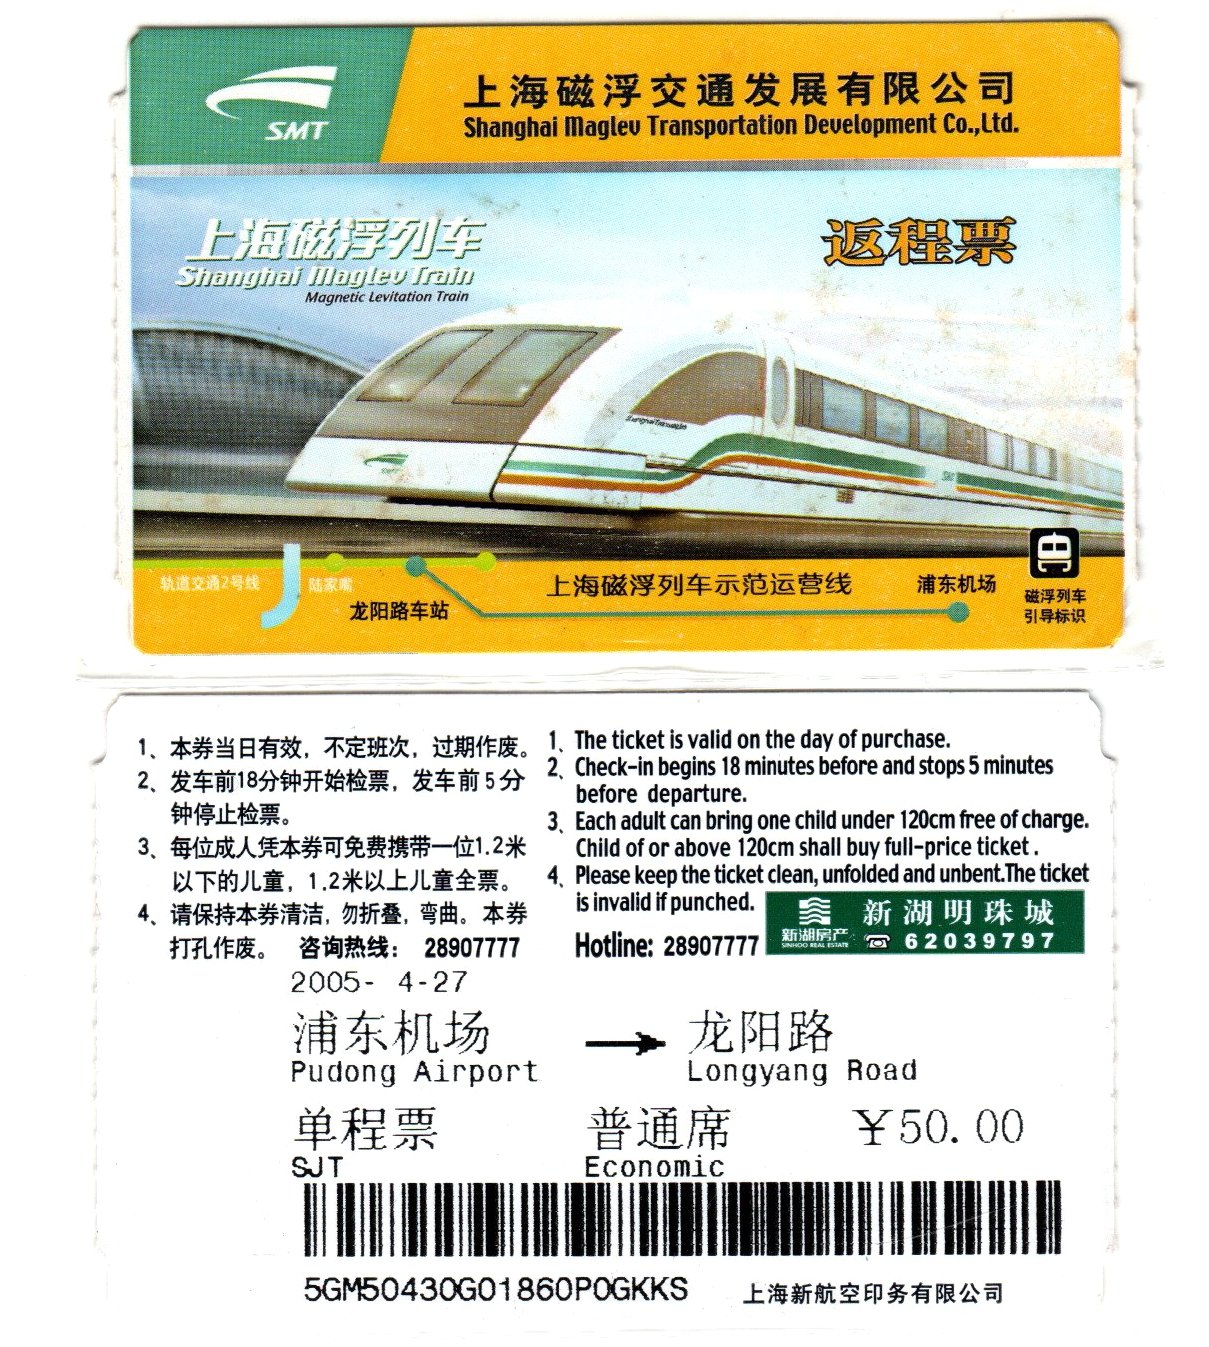 T5022, Shanghai Magnetic Train Card (World Only Magnetic Train), 2005 Used